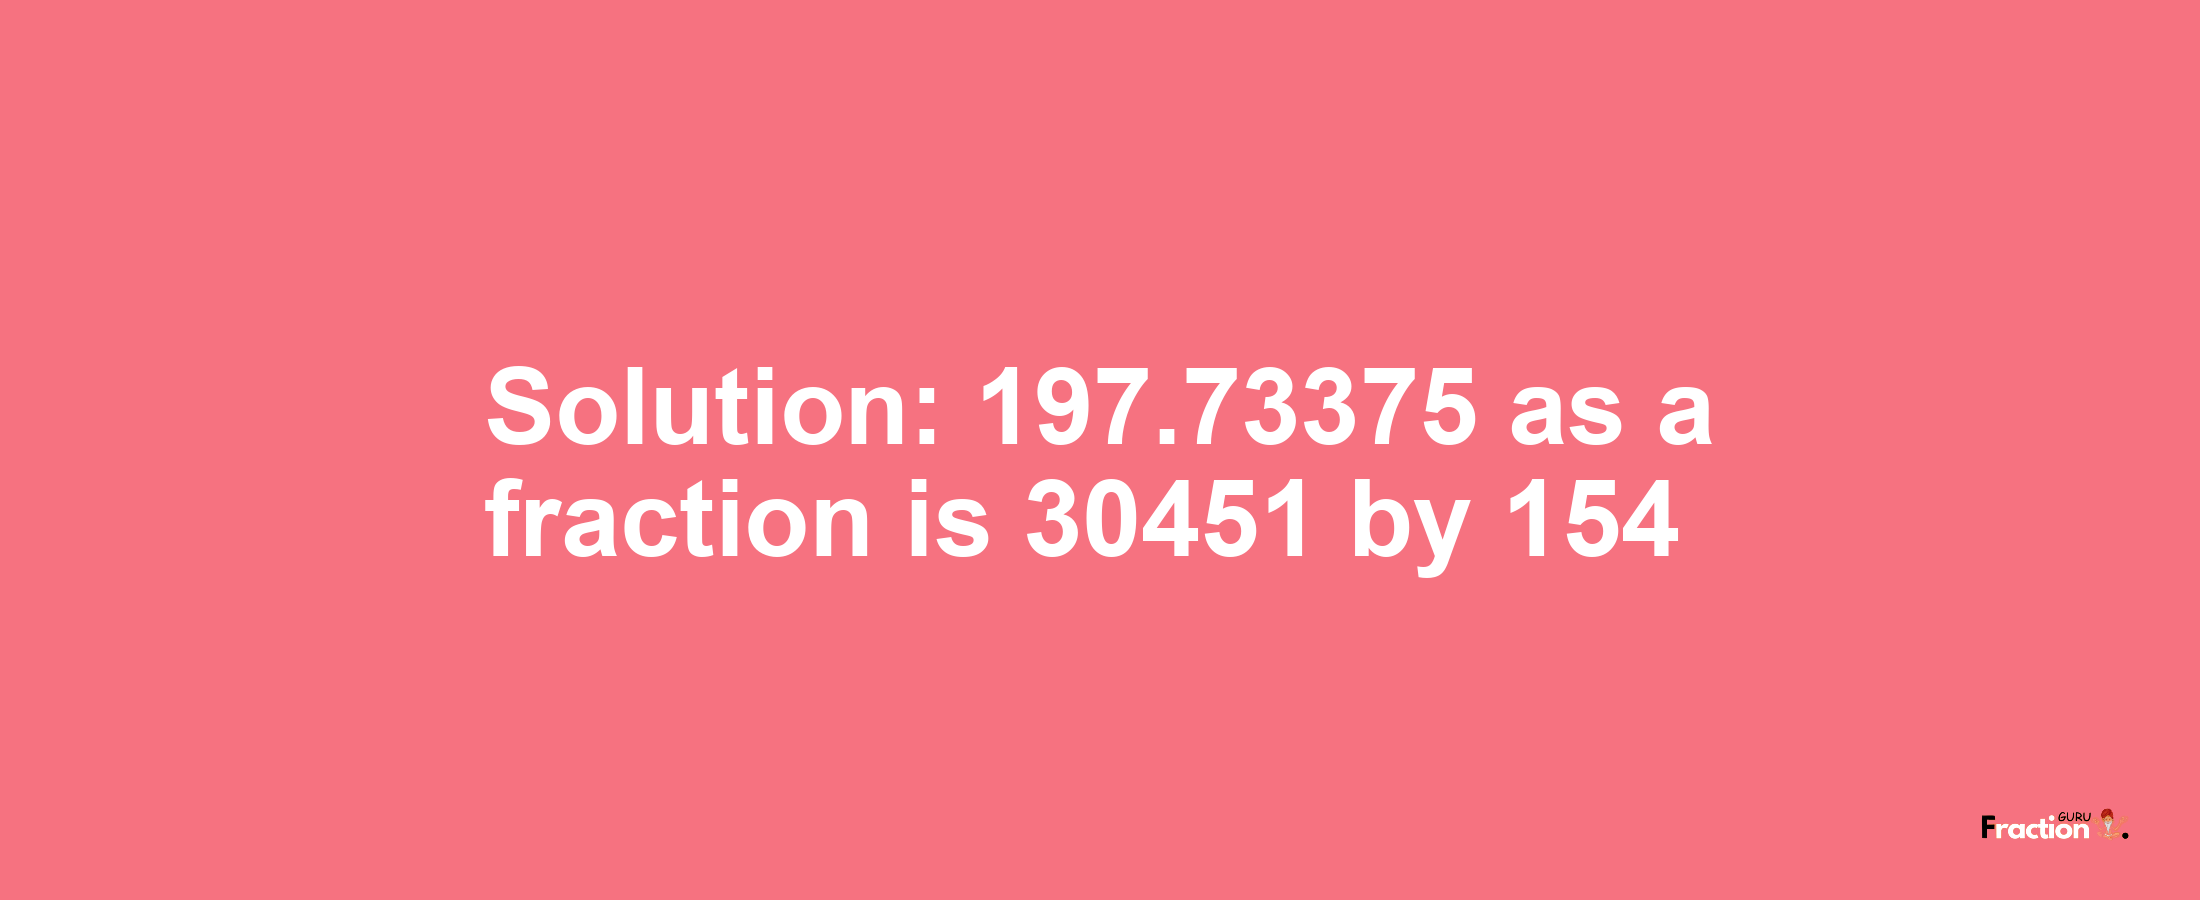 Solution:197.73375 as a fraction is 30451/154